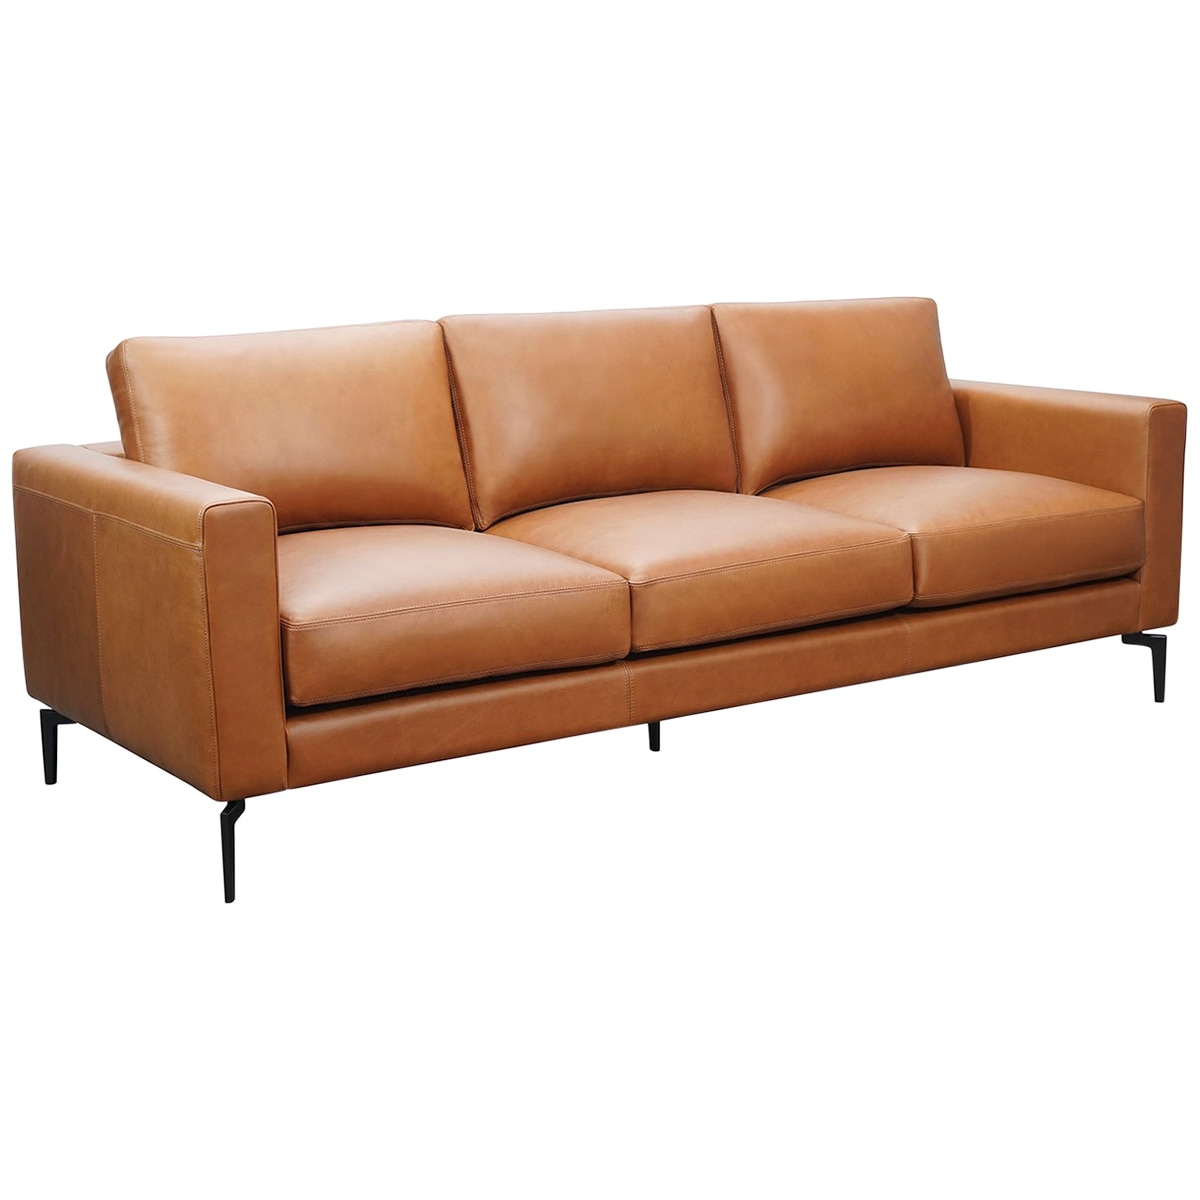 Fjords By Moran Toronto 3 Seater Leather Sofa